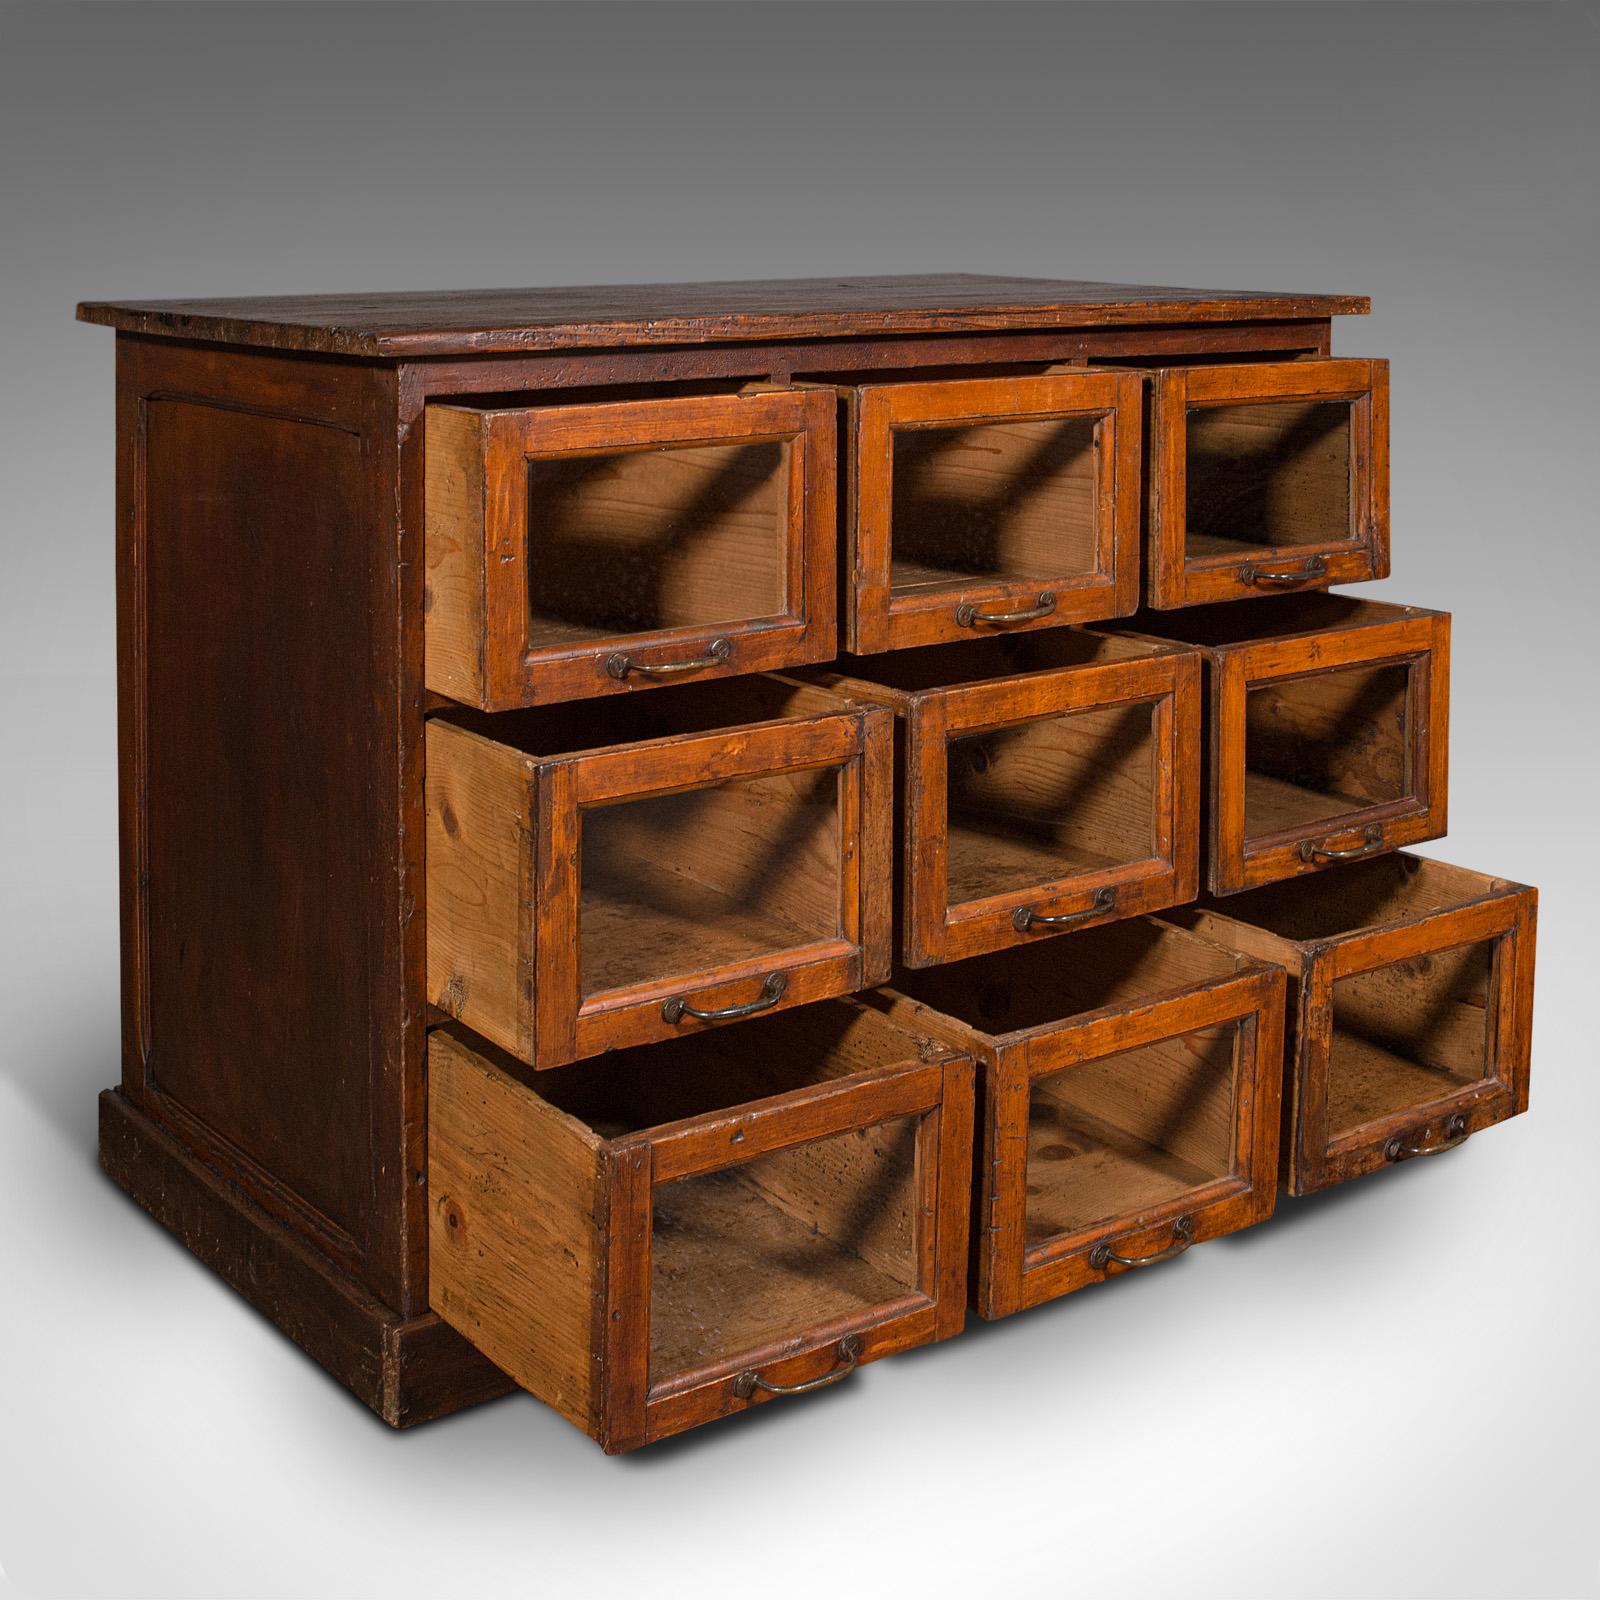 This is an antique haberdasher's cabinet. An English, pine shop keeper's glazed chest of drawers, dating to the late Victorian period, circa 1900.

Superb storage and patination to this useful shop retail cabinet
Displays a desirable aged patina